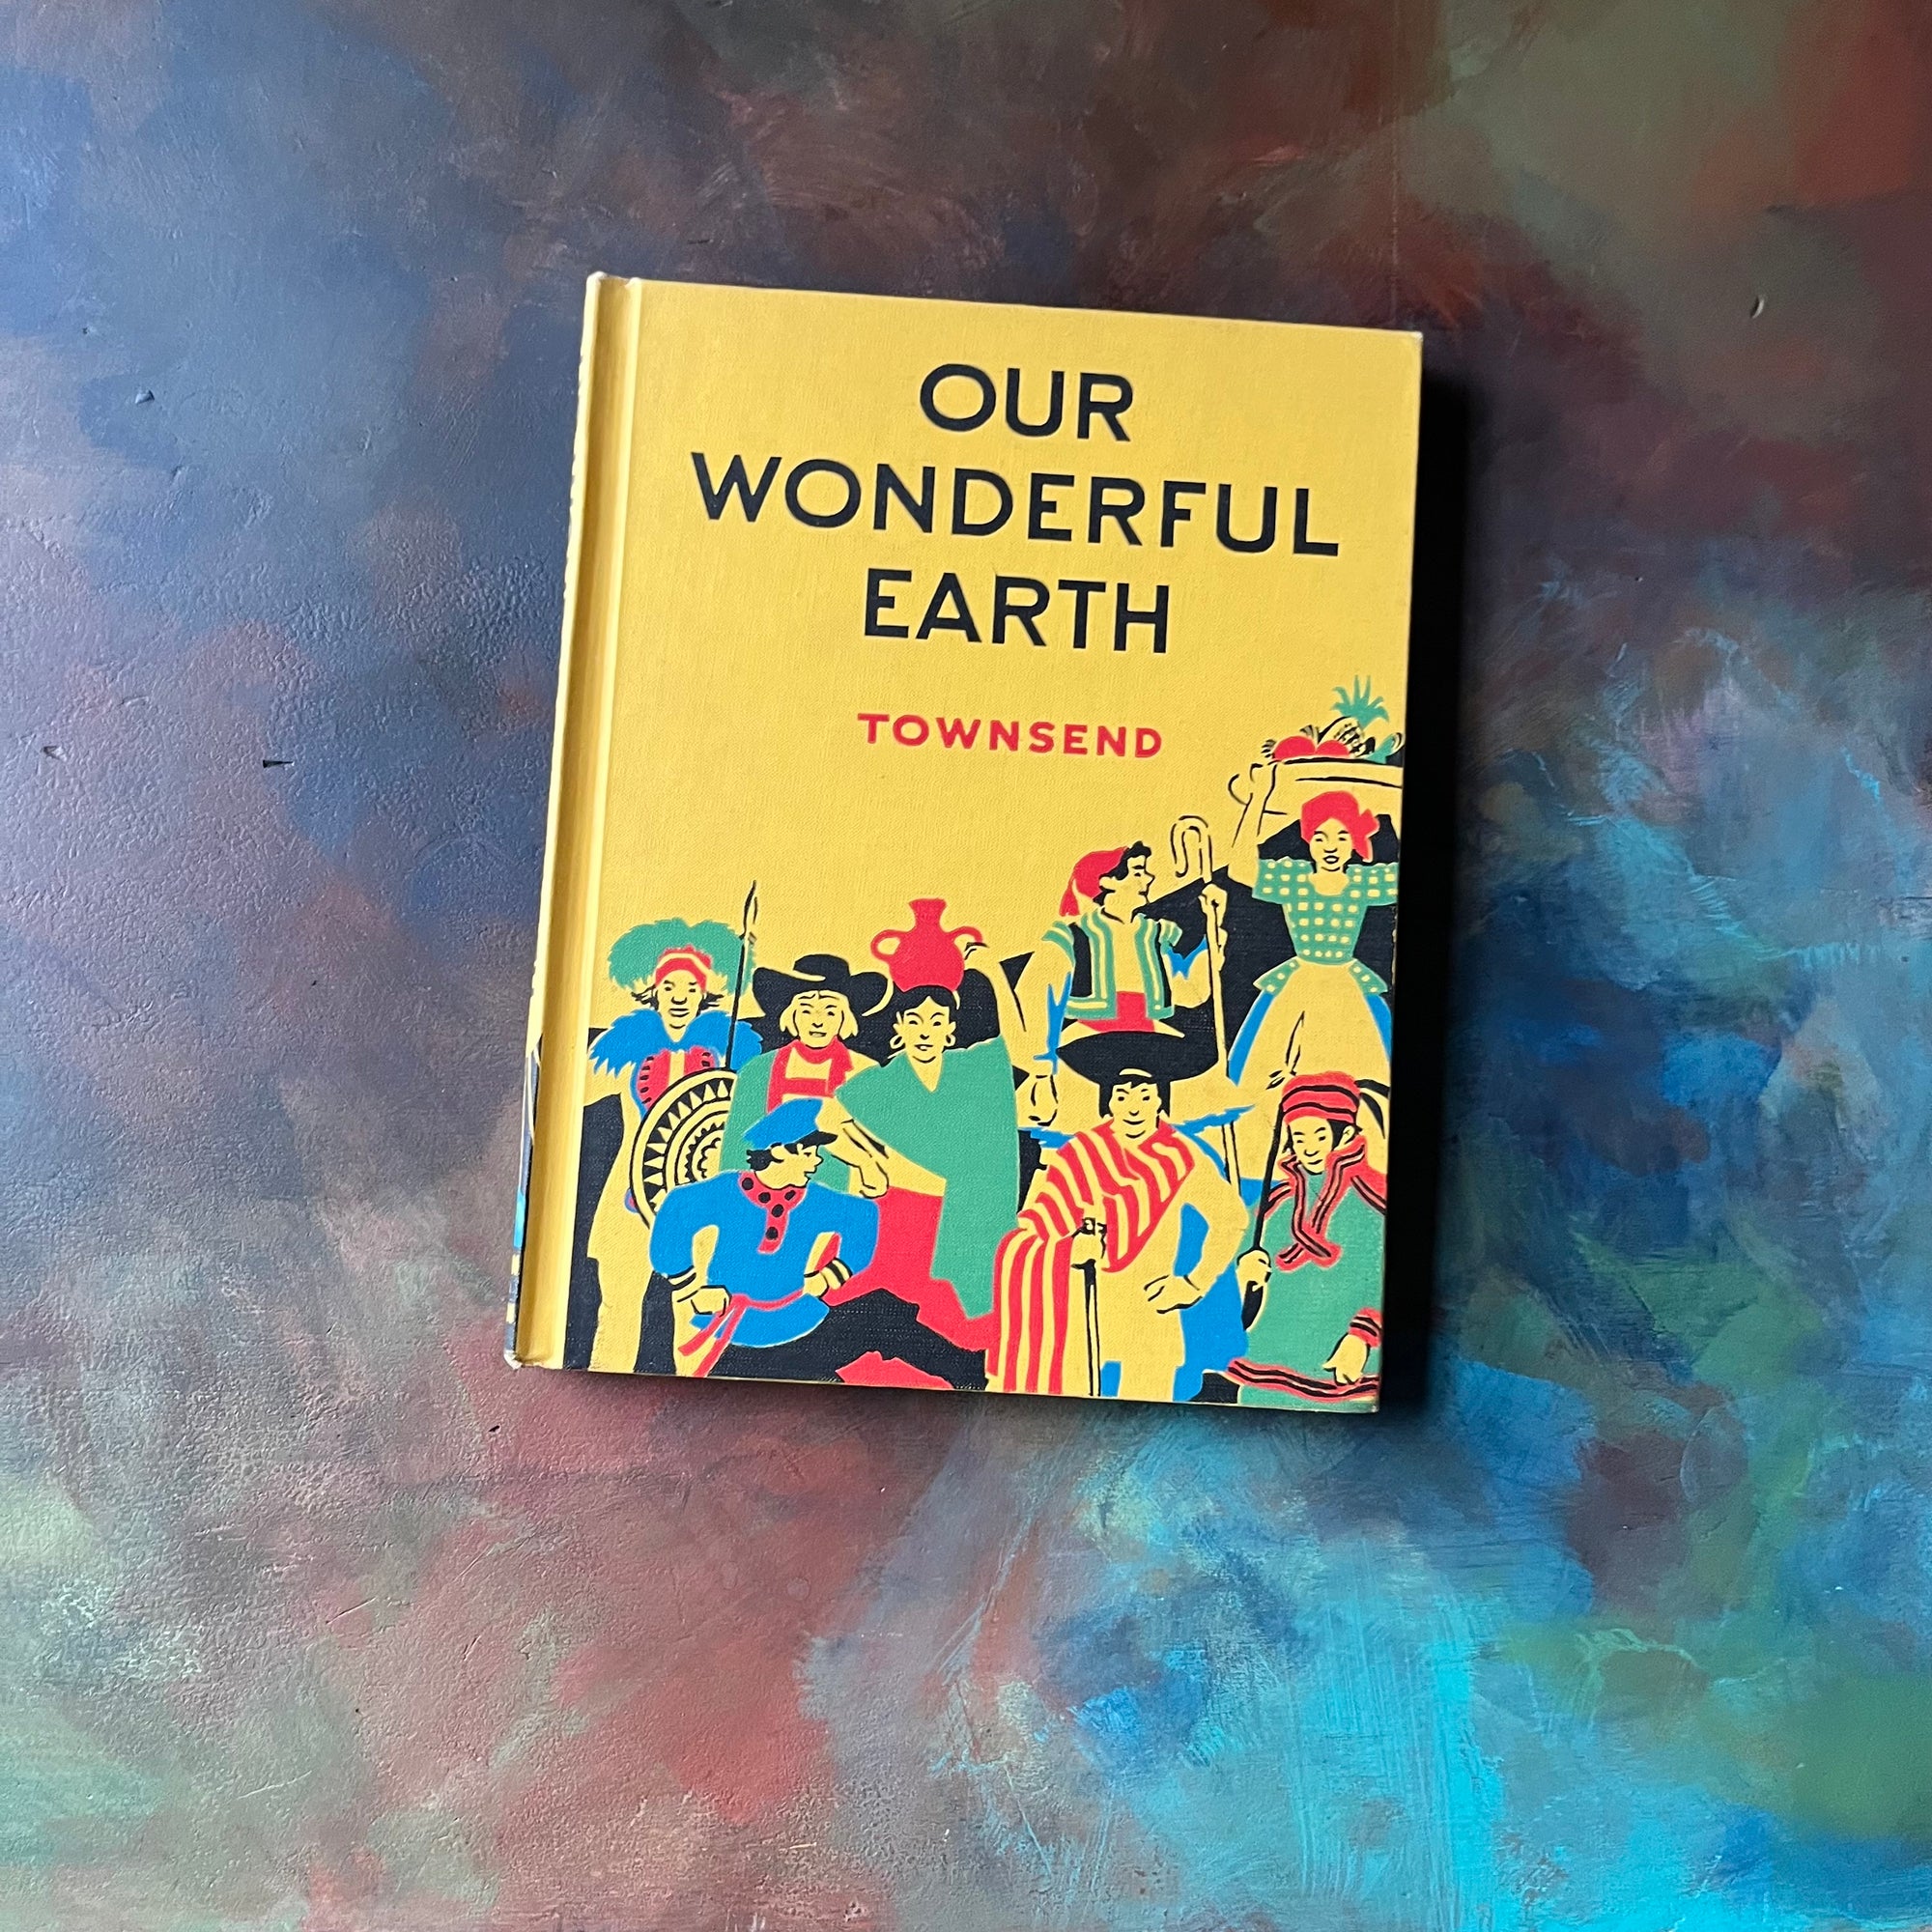 Our Wonderful Earth-The Story of How It Became The Great Round Earth It Is Today-Written & Illustrated by Herbert Townsend-vintage children's science book-view of the front cover in bright yellow with an illustration of people from different cultures at the bottom